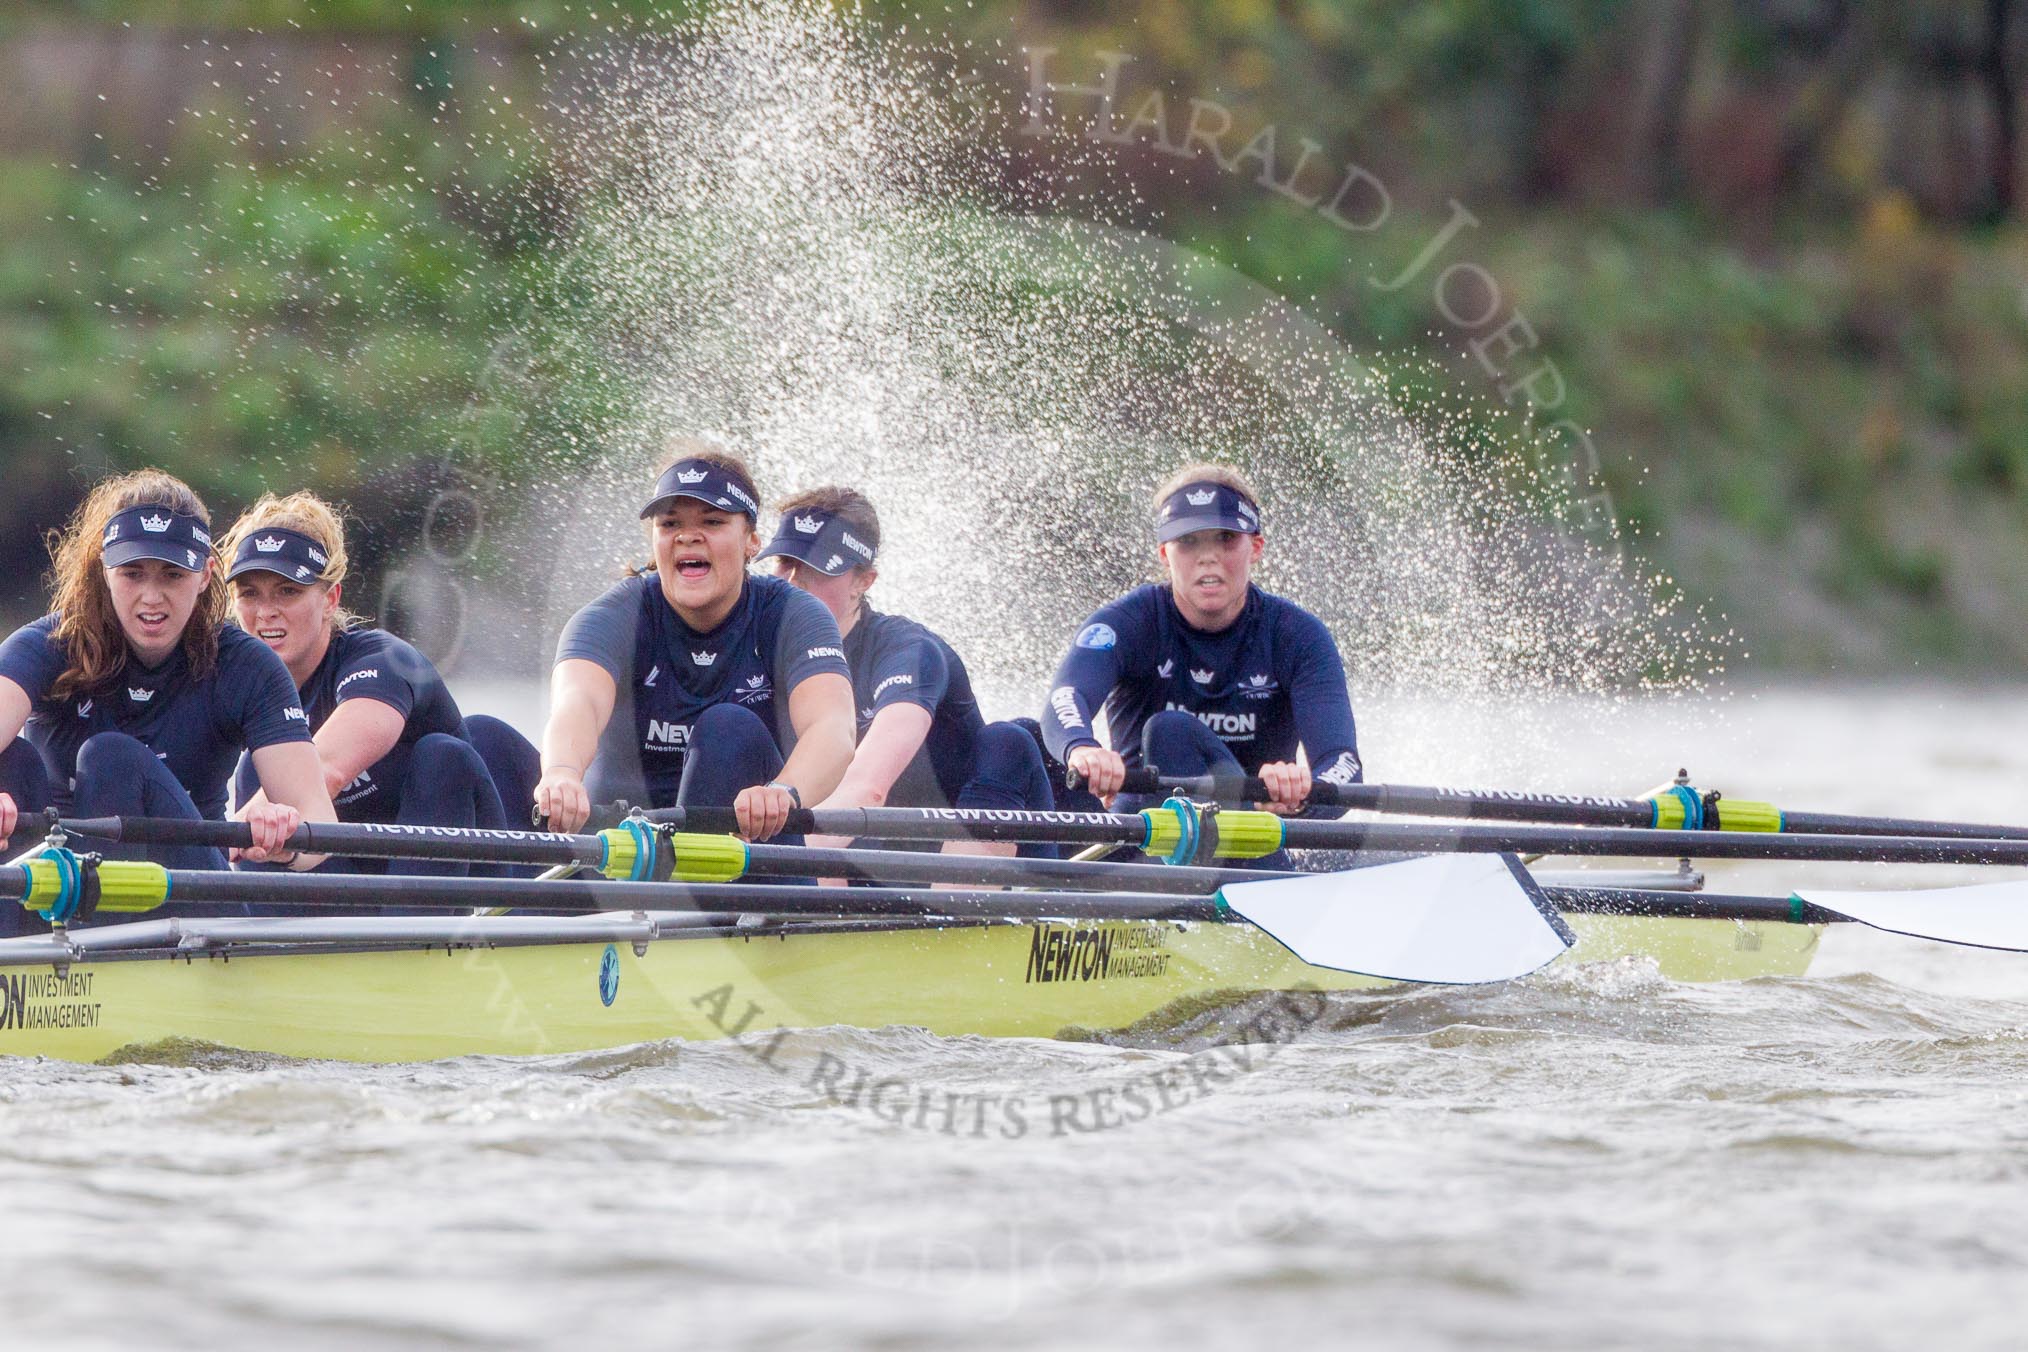 The Boat Race season 2016 - Women's Boat Race Trial Eights (OUWBC, Oxford): "Charybdis", here 5-Ruth Siddorn, 4-Emma Spruce, 3-Lara Pysden, 2-Christina Fleischer, bow-Georgie Daniell.
River Thames between Putney Bridge and Mortlake,
London SW15,

United Kingdom,
on 10 December 2015 at 12:35, image #294